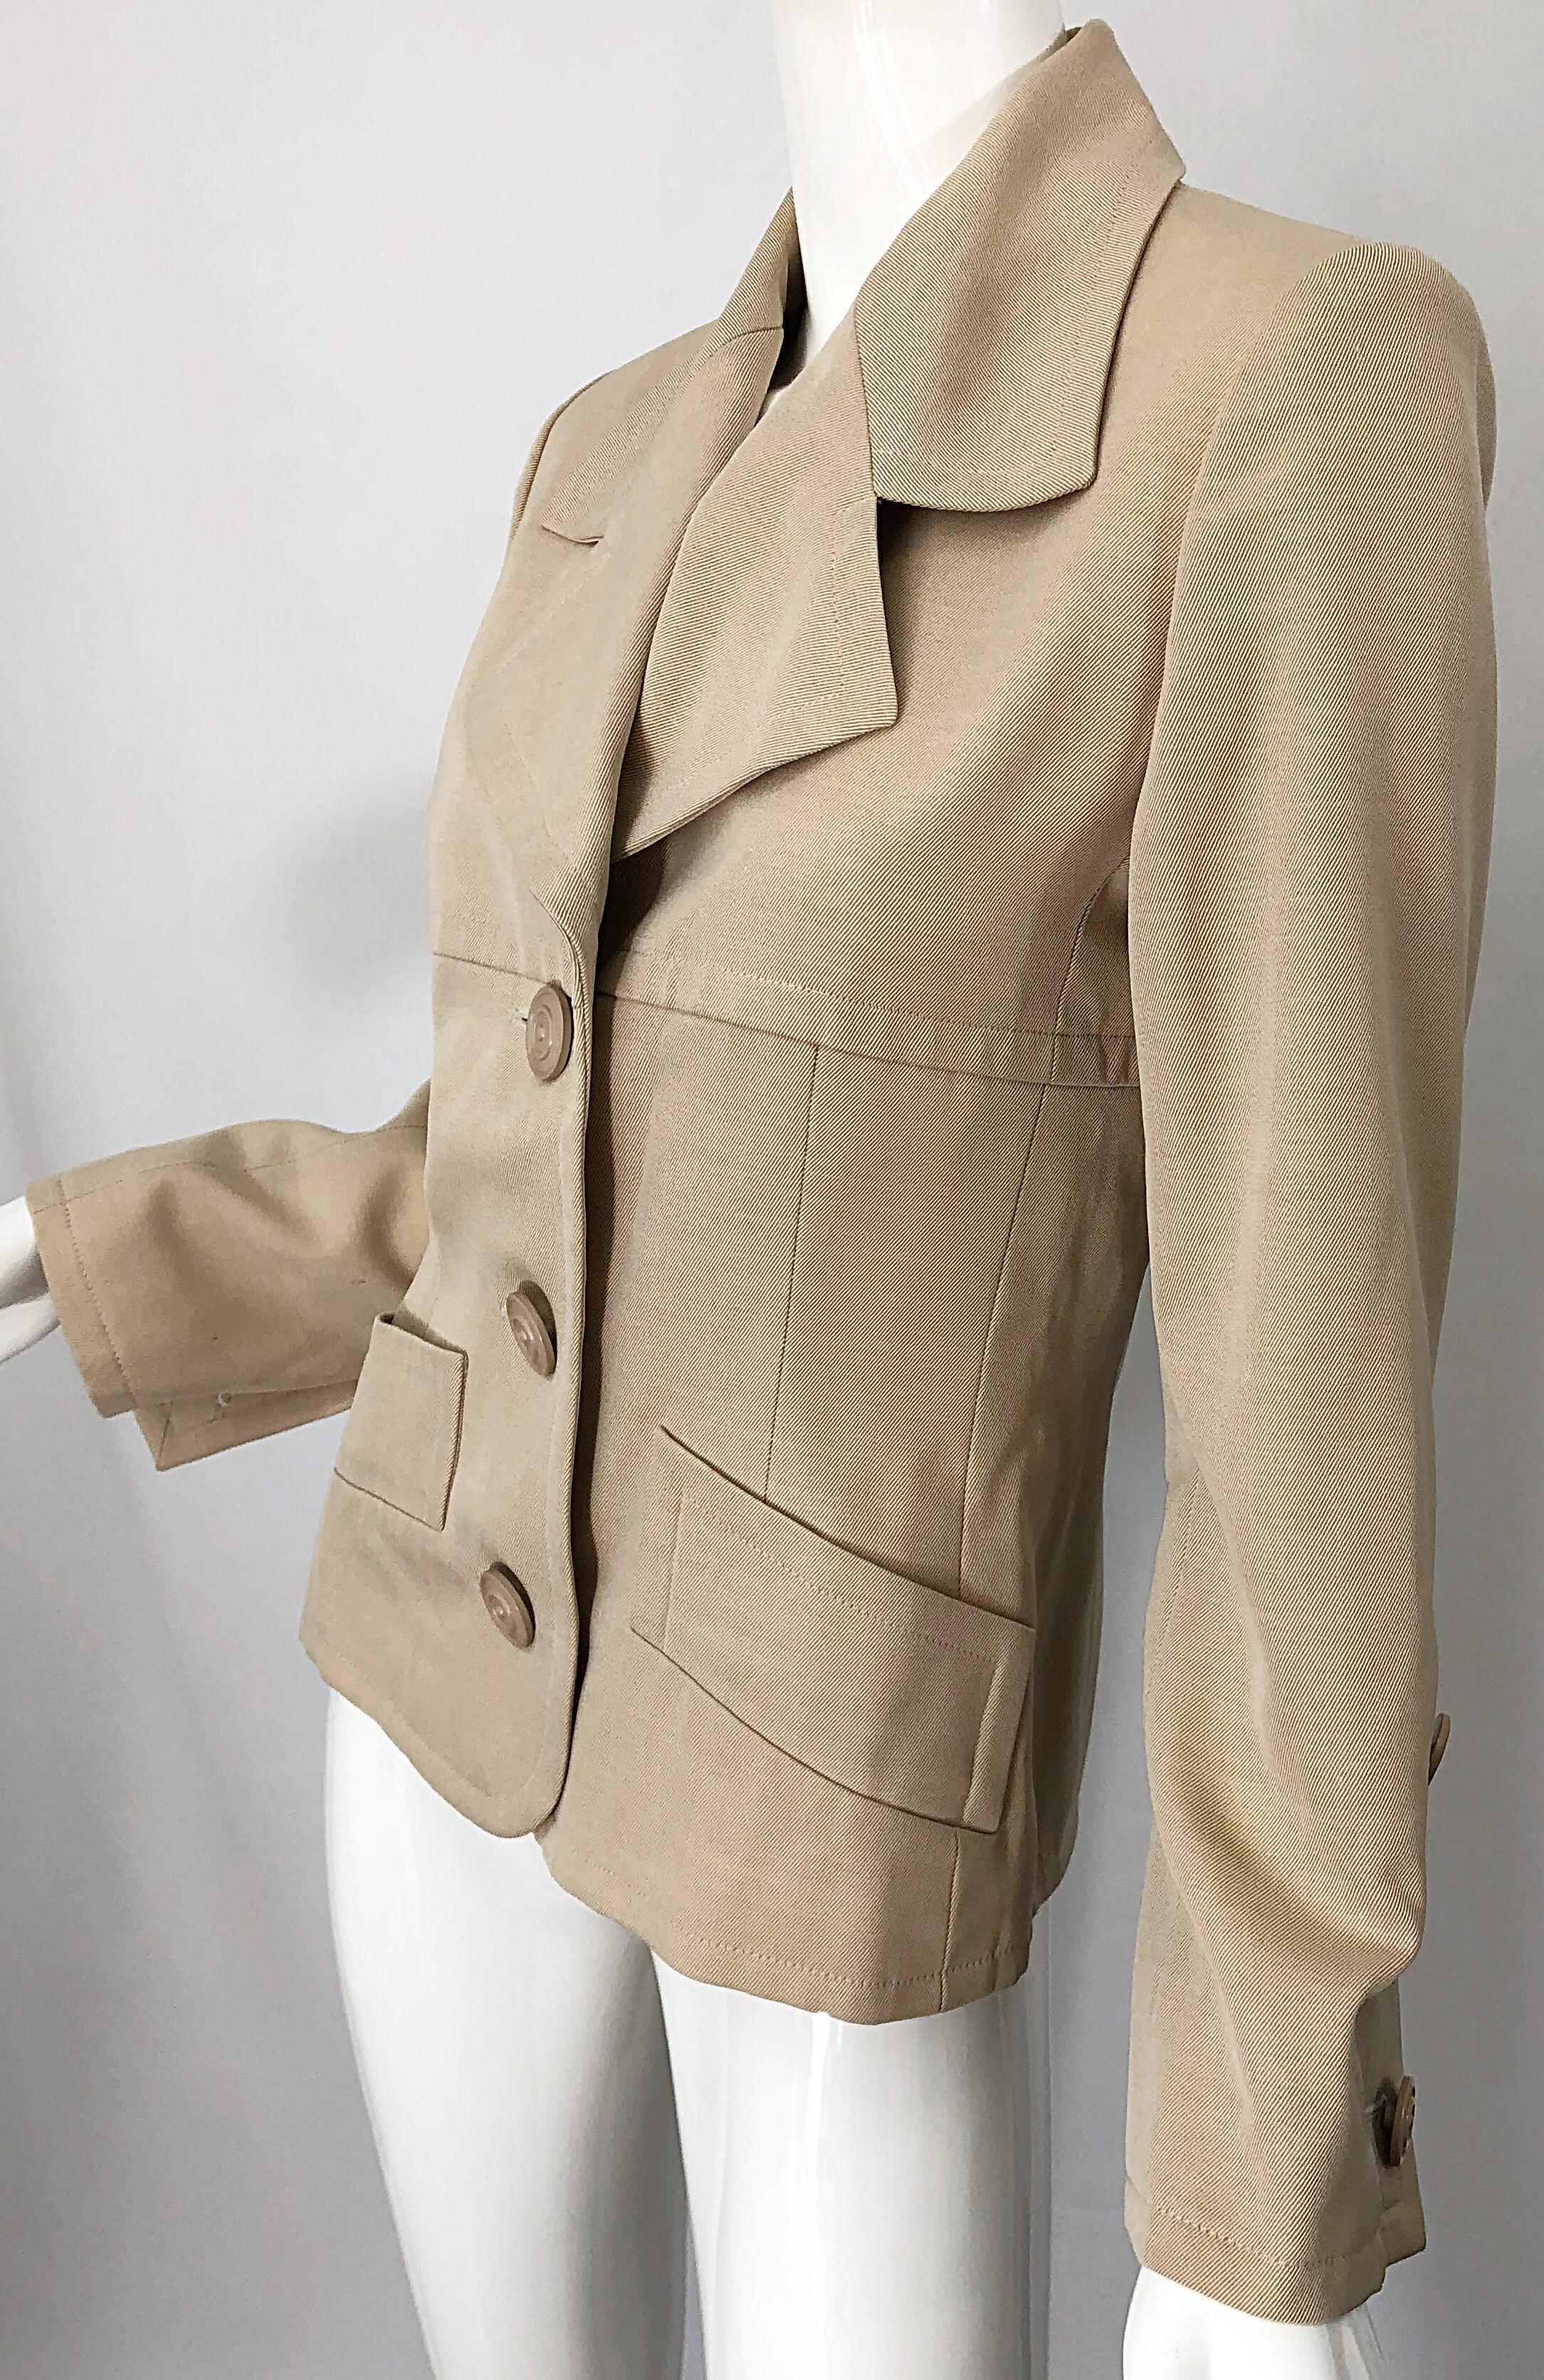 Vintage Givenchy Couture by Alexander McQueen 1990s Khaki Tan 90s Jacket Blazer 1